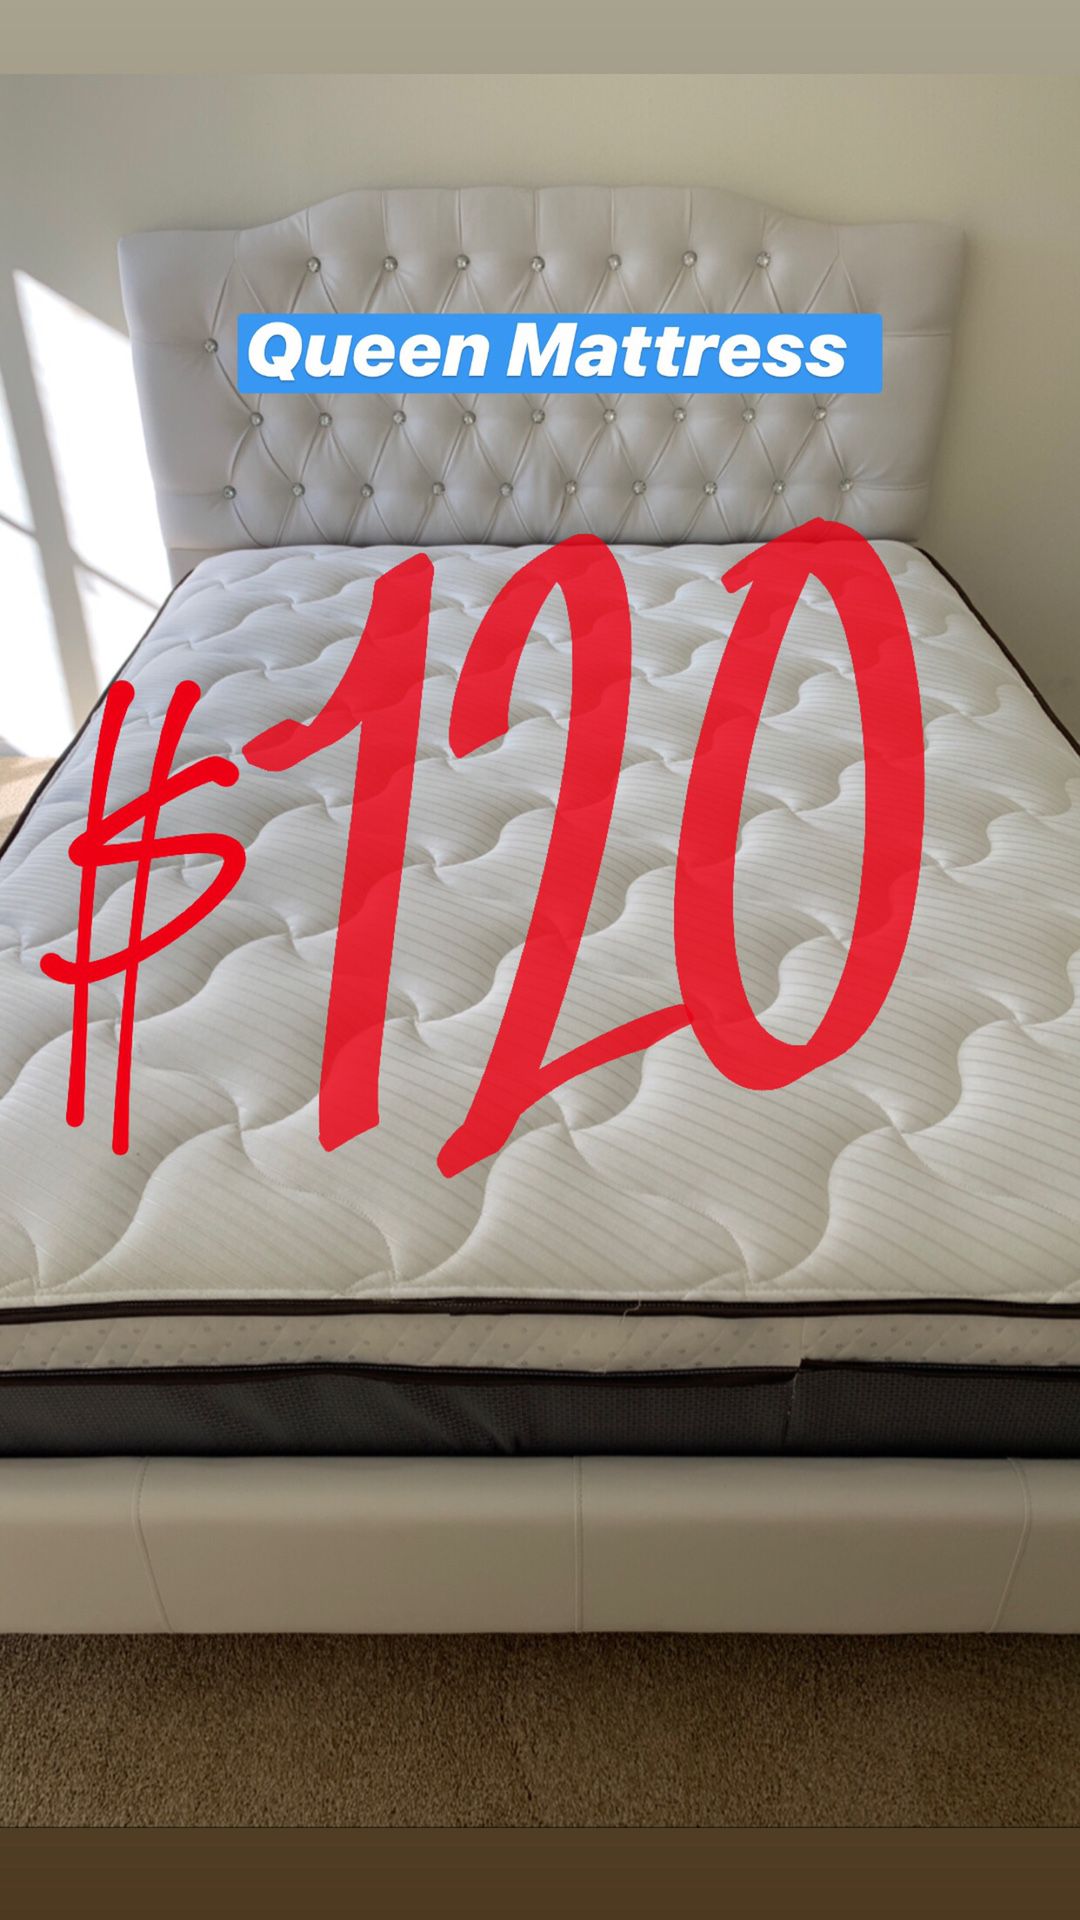 LOCATED IN LOS ANGELES $20 Delivery Fee ‼️ BRAND NEW PILLOW TOP MATTRESSES💯 COLCHONES NUEVOS PILLOW TOP 💯 Queen $120 ❌ $180 With Box Spring 💥💥 F